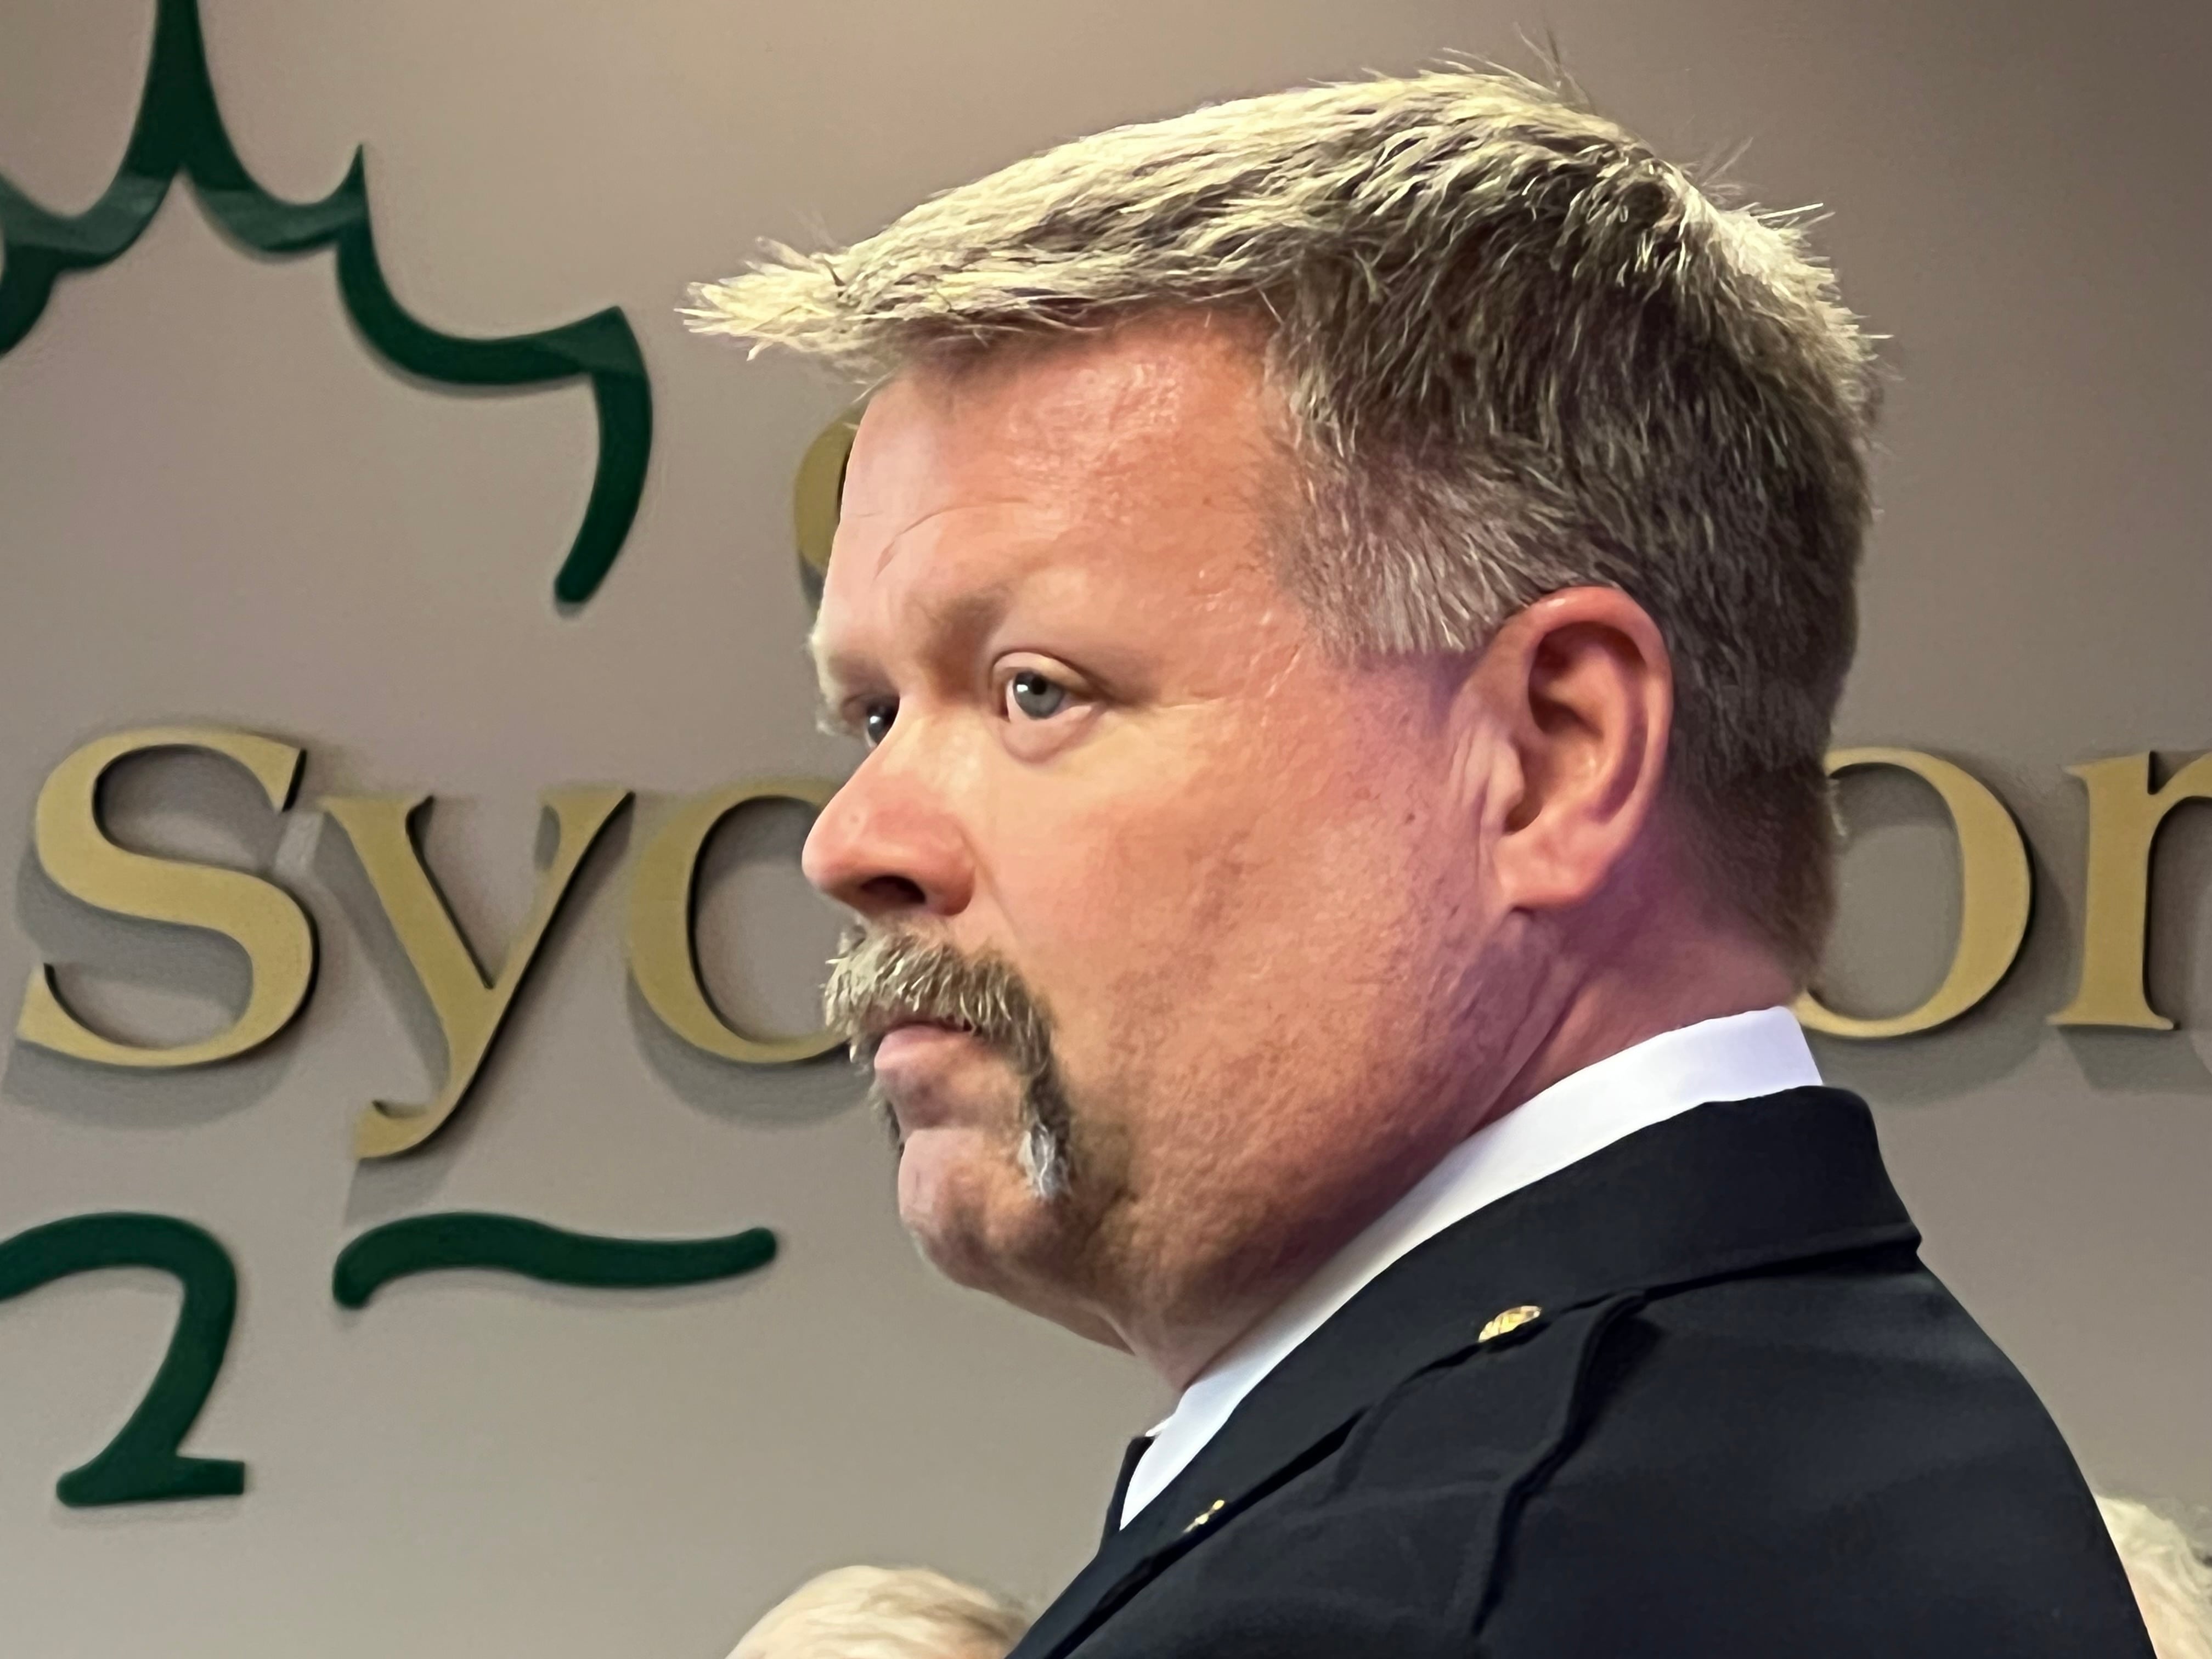 Sycamore’s newest deputy fire chief hopes to help staffing levels, aided by 28-year experience in DeKalb